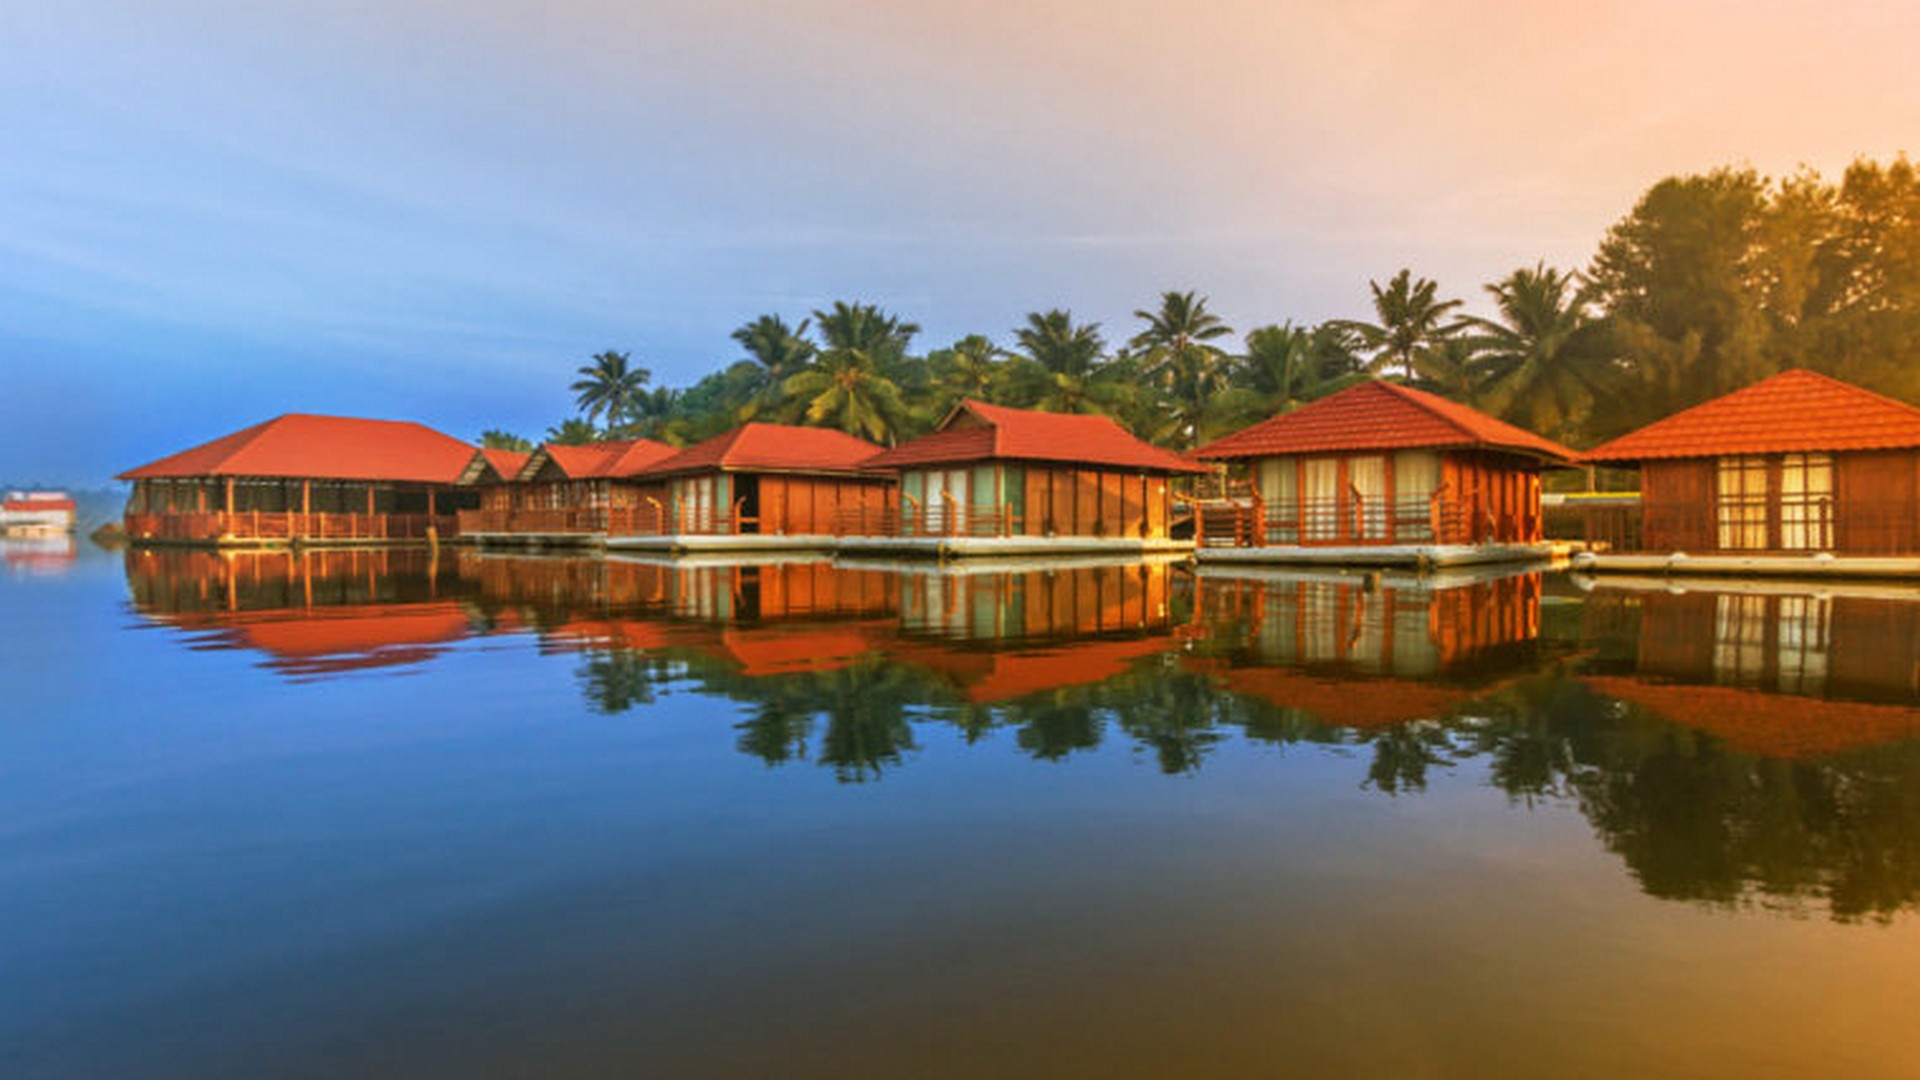 15 Most Popular Kerala Tours For A Smashing Holiday!